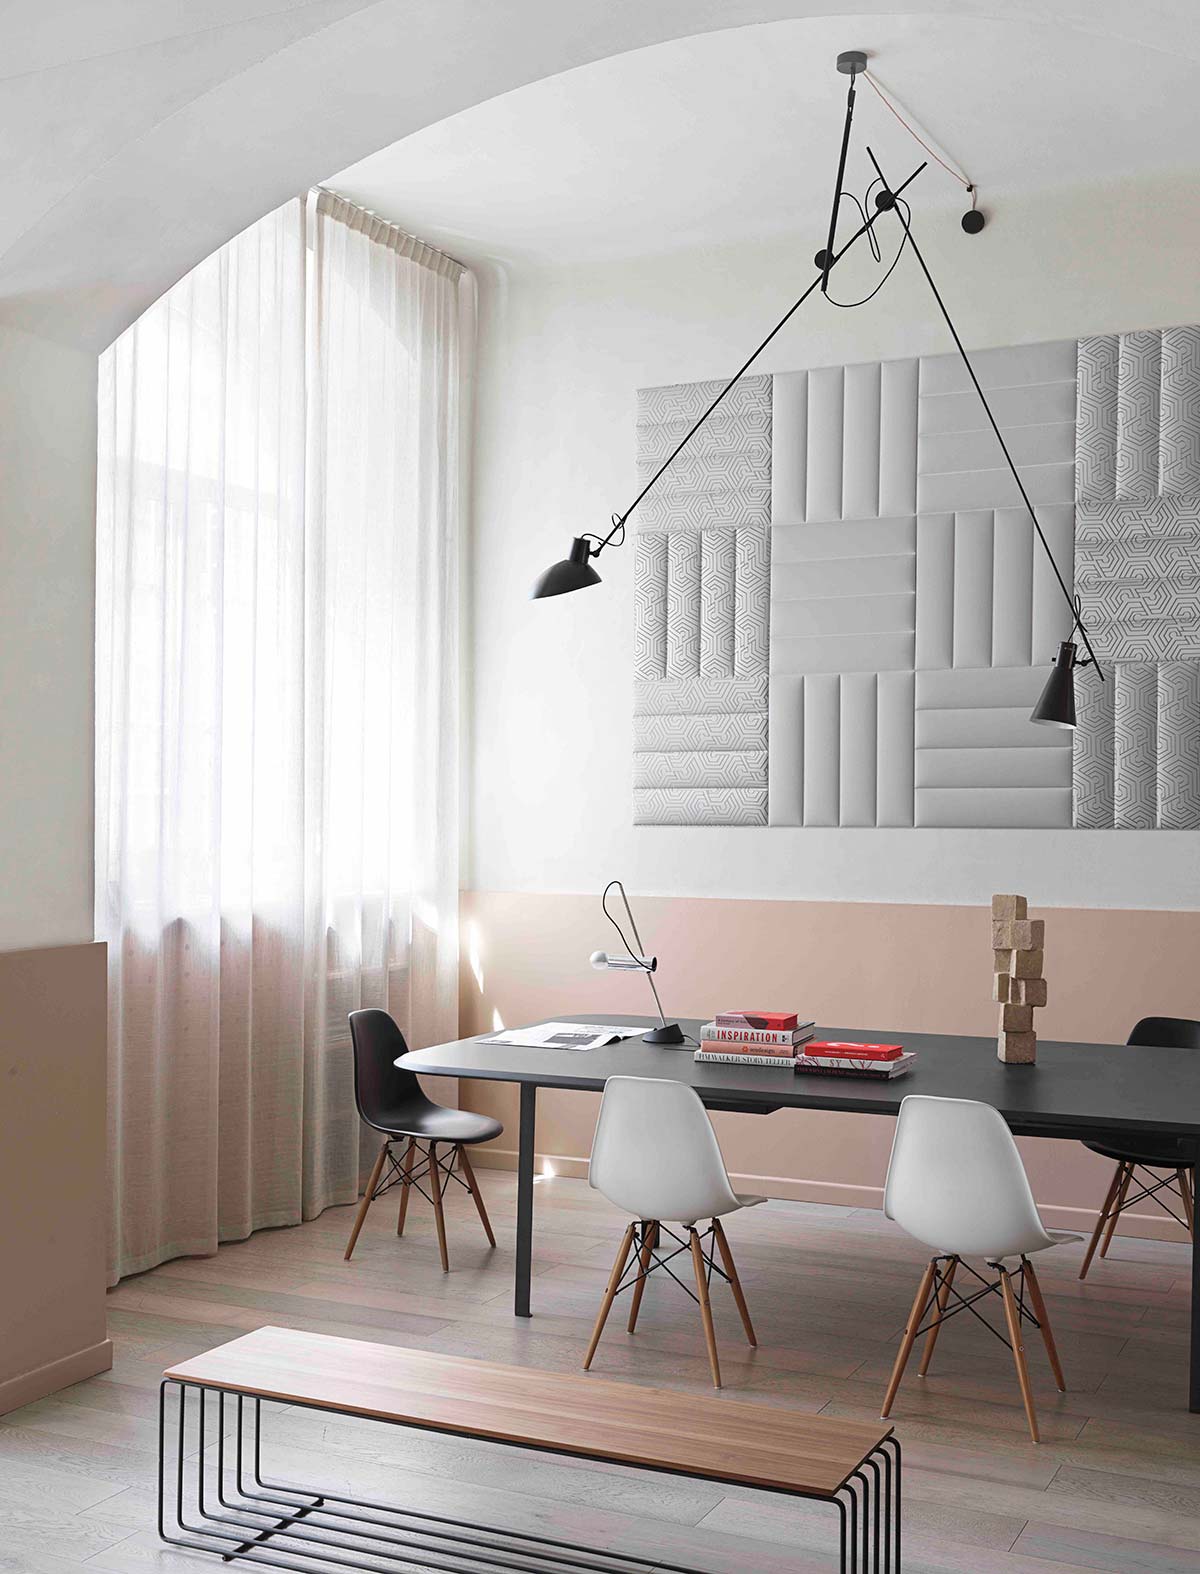 Arianna, Cloud Acoustic Wall collection, Rubelli Acoustics by Slalom